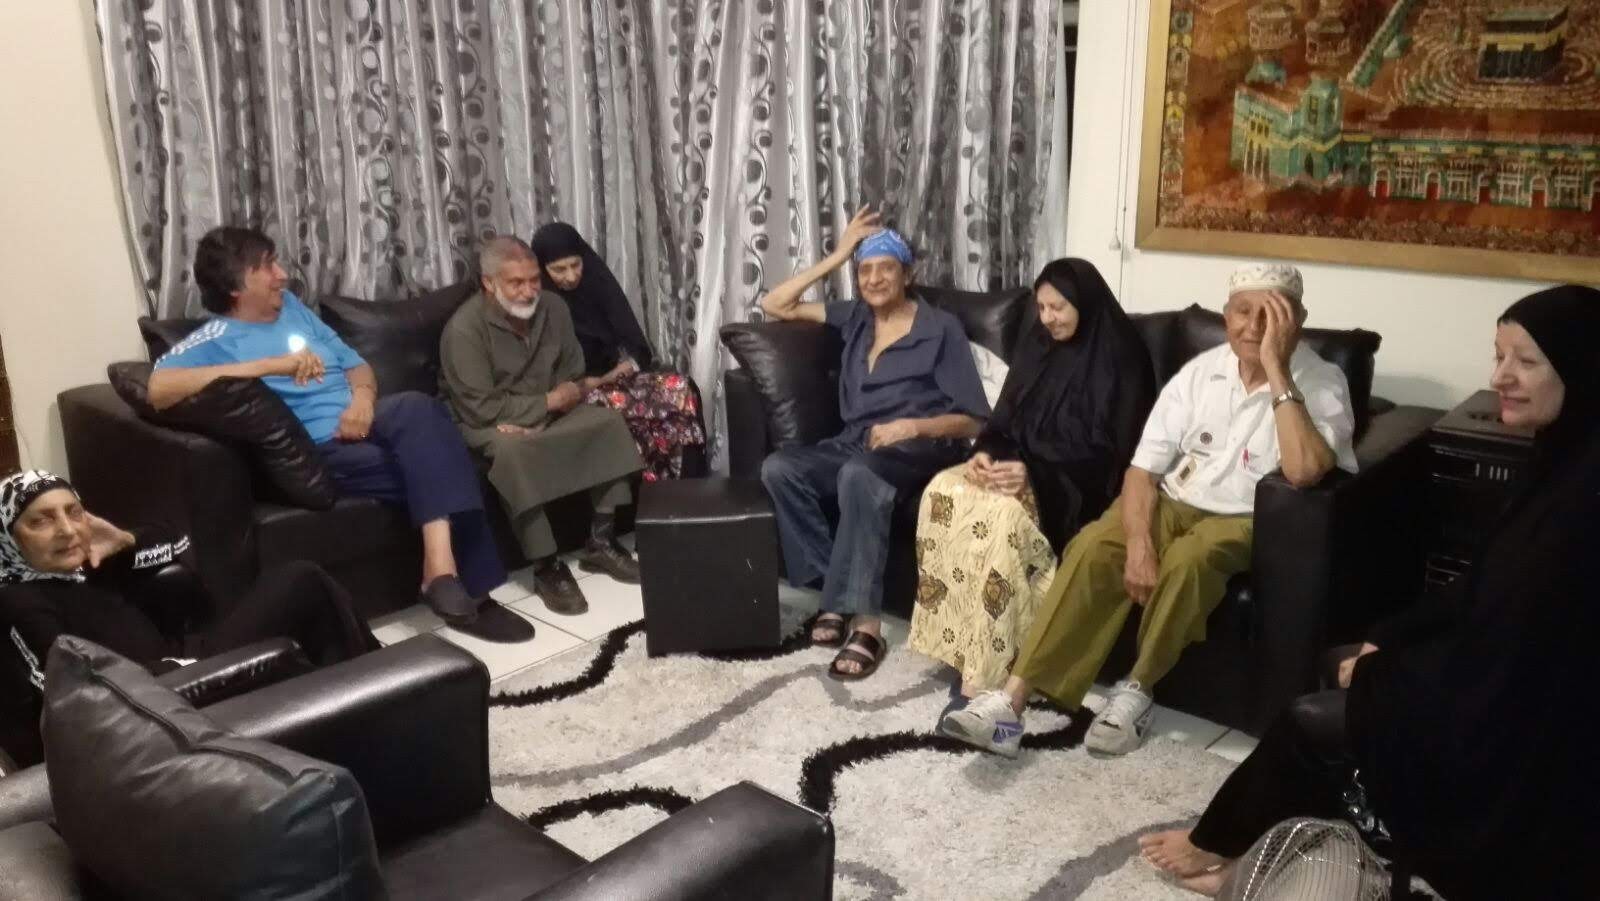 Zohra, Ismail Sooliman's sister, currently ill, Sattar (father's brother, passed on), Mamdie, brother in law, passed on, his wife Hajra, father's sister, currently ill, Ismail Sooliman, passed on, his sister Khadija and her husband Ebrahim, both passed on, and Imtiaz Sooliman’s stepmother Farida at Ismail's house in Mohadin, Potchefstroom. Imtiaz notes that this is probably the most significant photograph in this piece. Image: Supplied by Imtiaz Sooliman